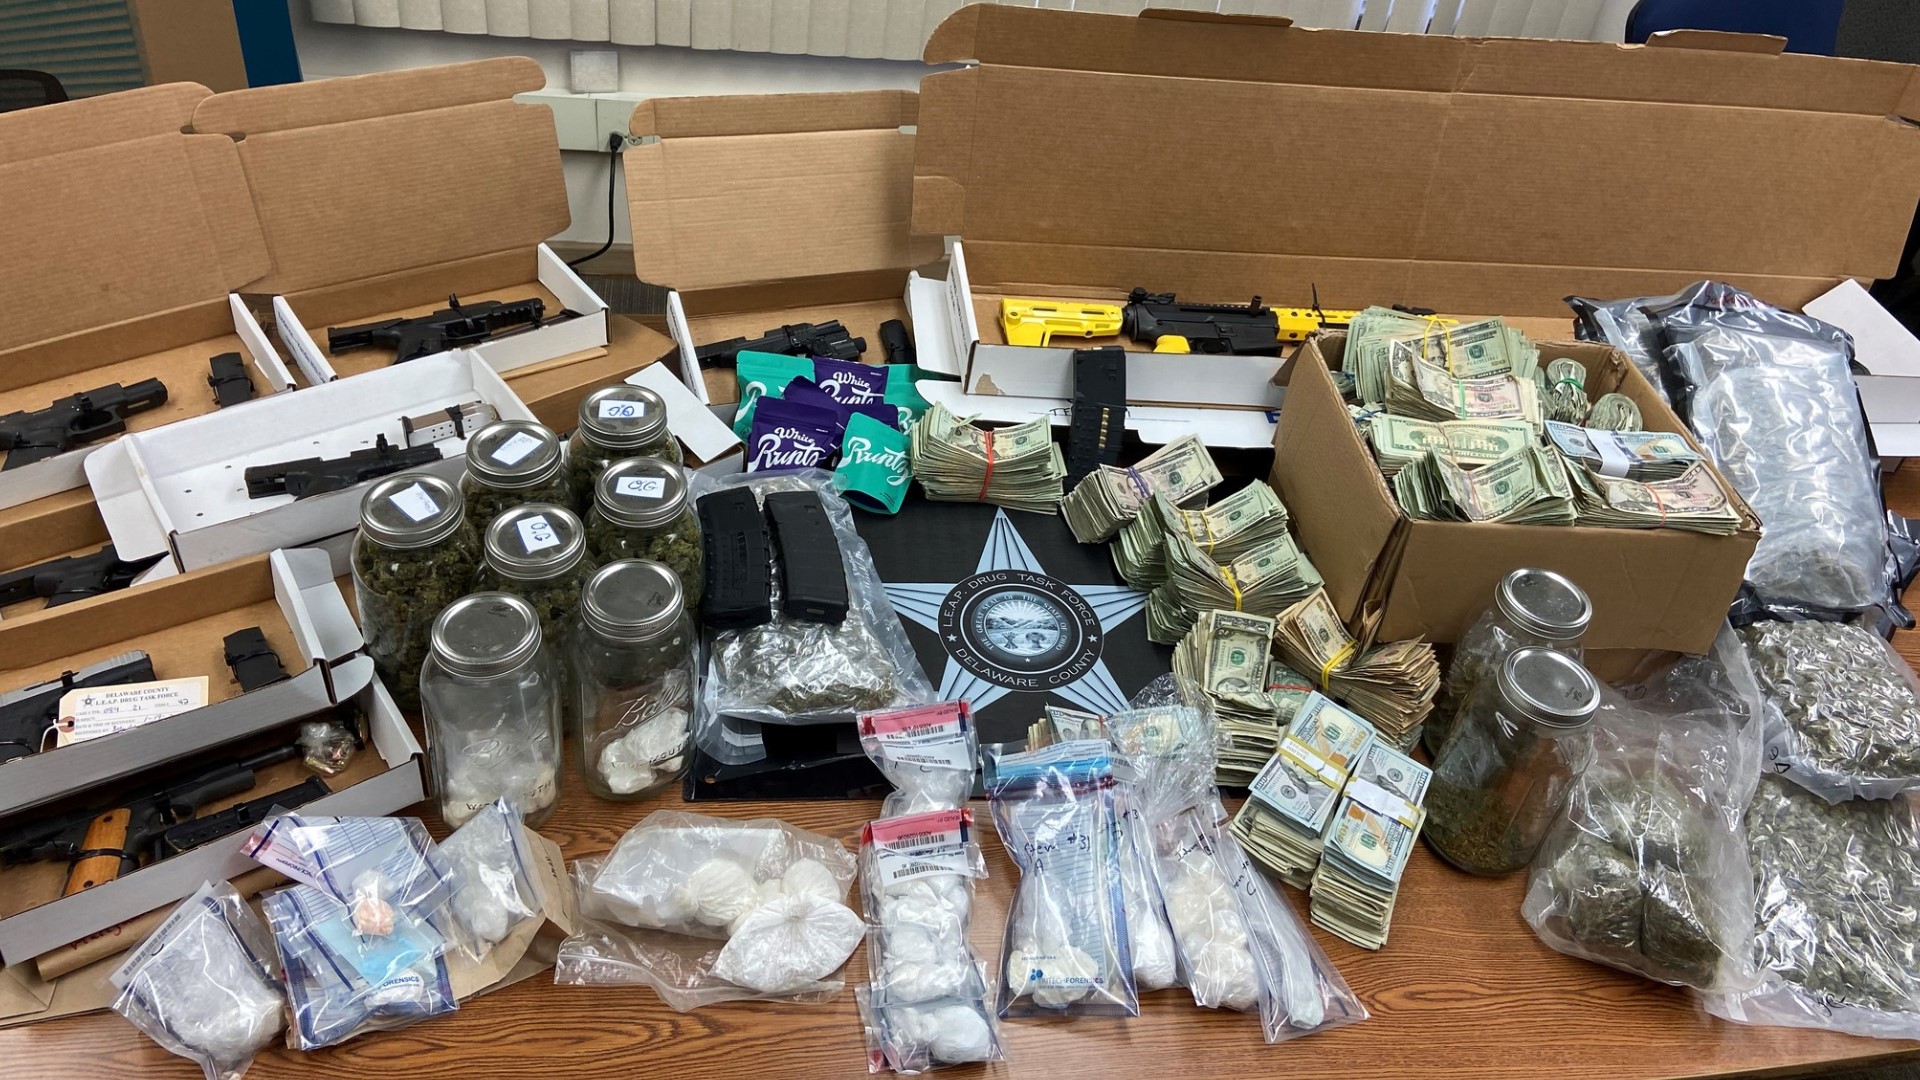 Along with the drugs, authorities seized firearms, including some that were stolen, and nearly $100,000 in cash.